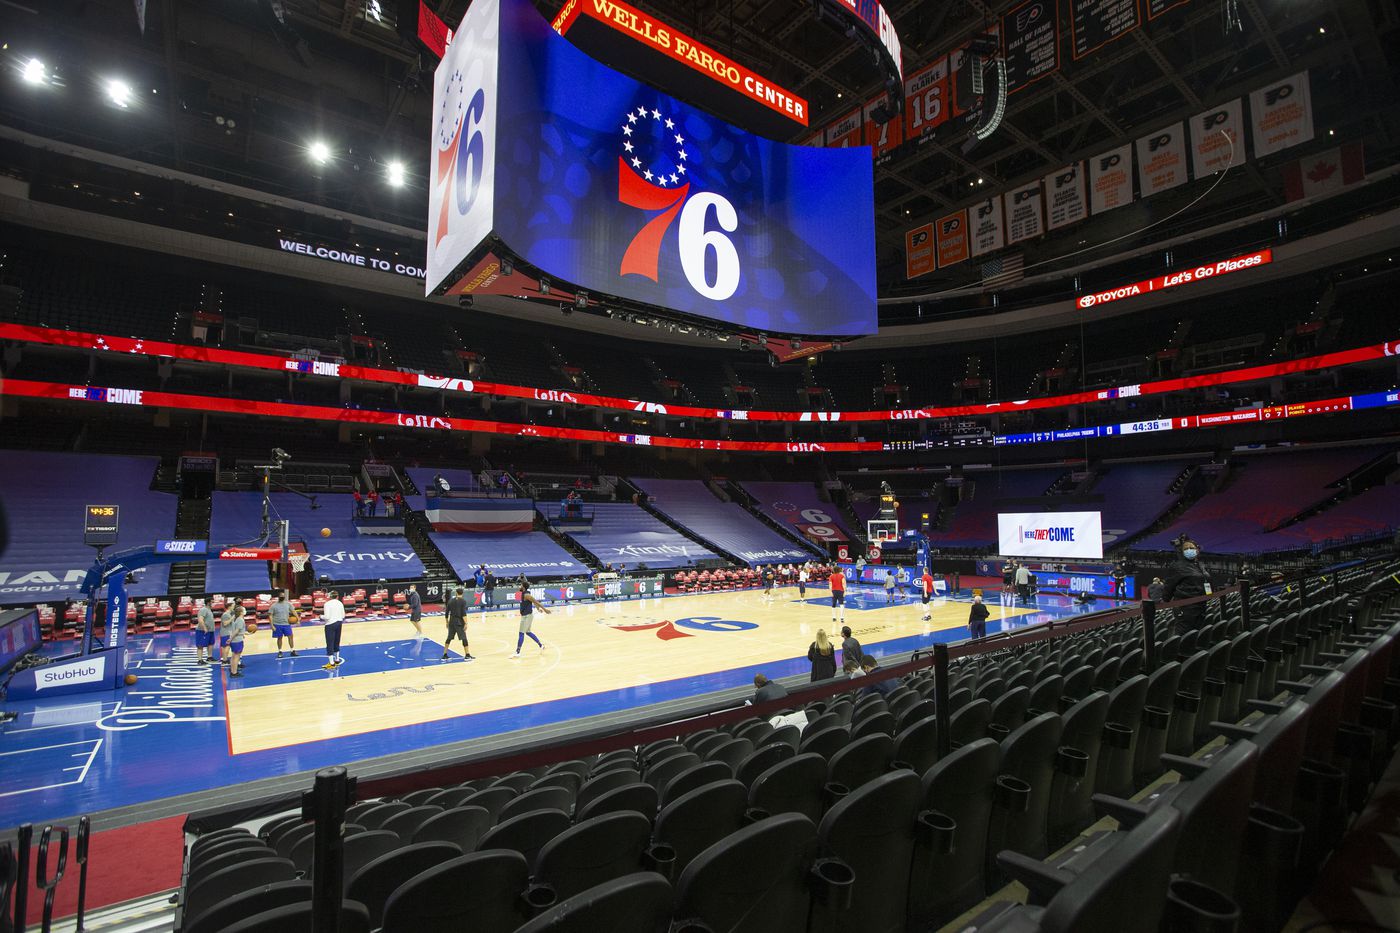 The basketball court at Wells Fargo Center with the huge scoreboard showing the 76ers logo.